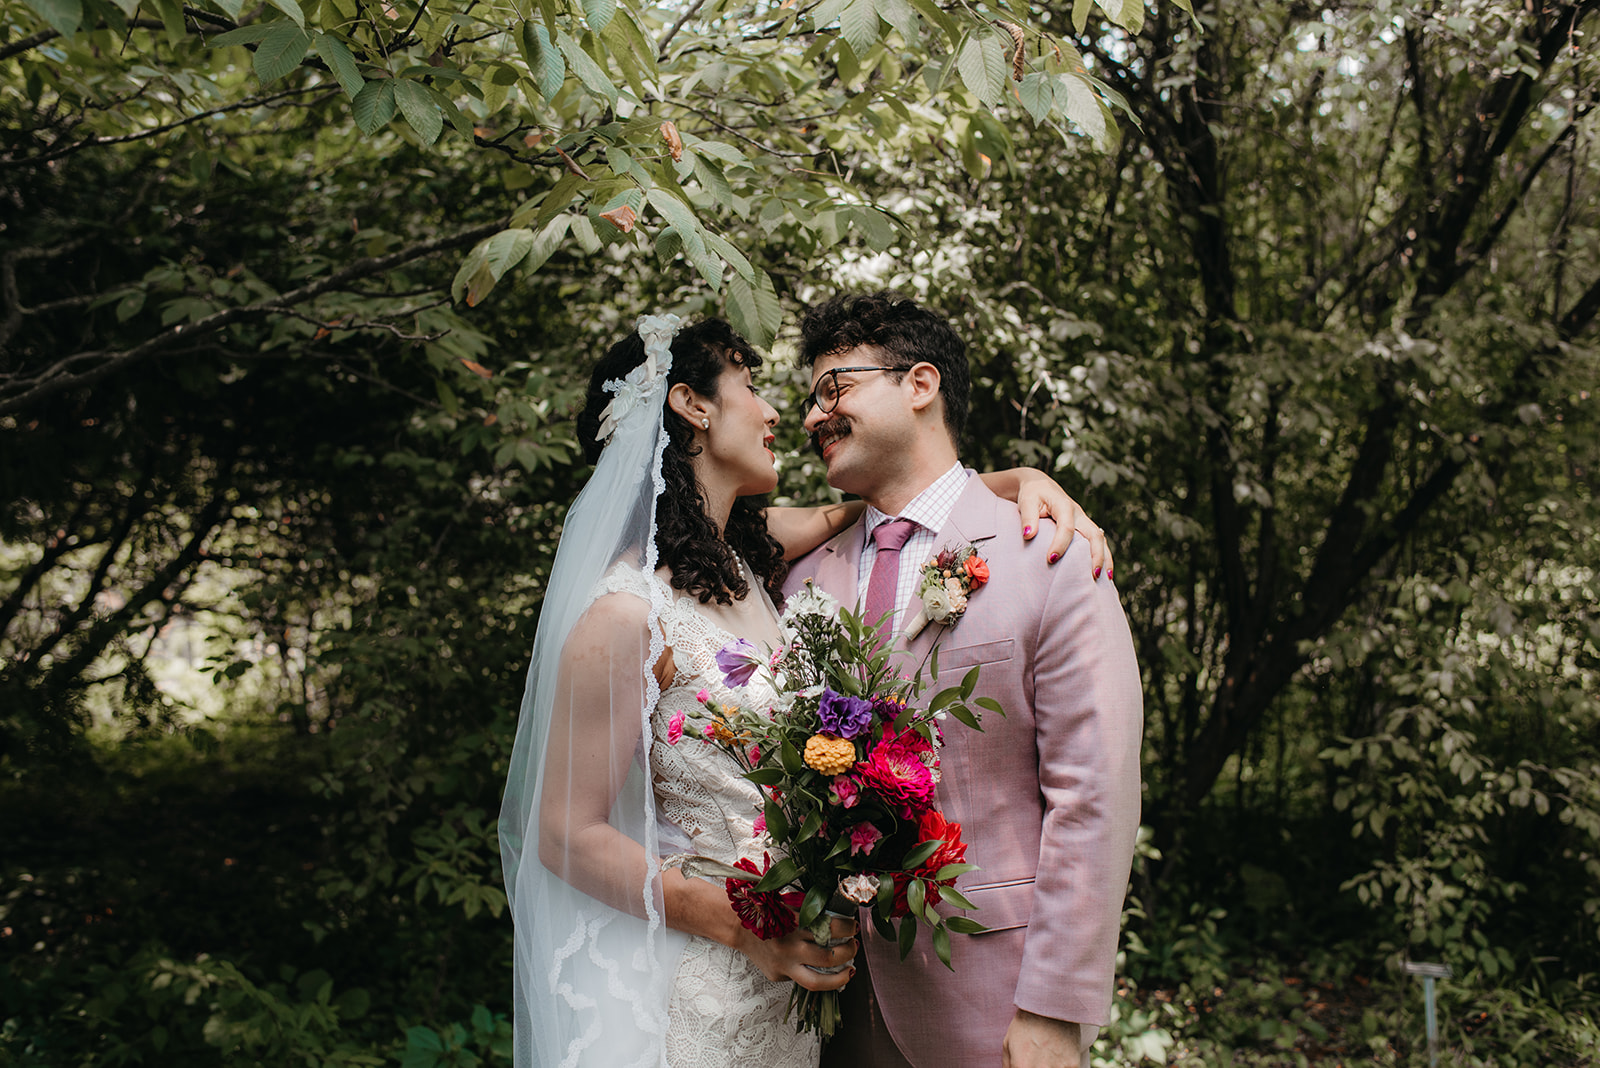 Eclectic, fun Jewish Wedding at the Varsity Theatre and Botanical Gardens in Chapel Hill